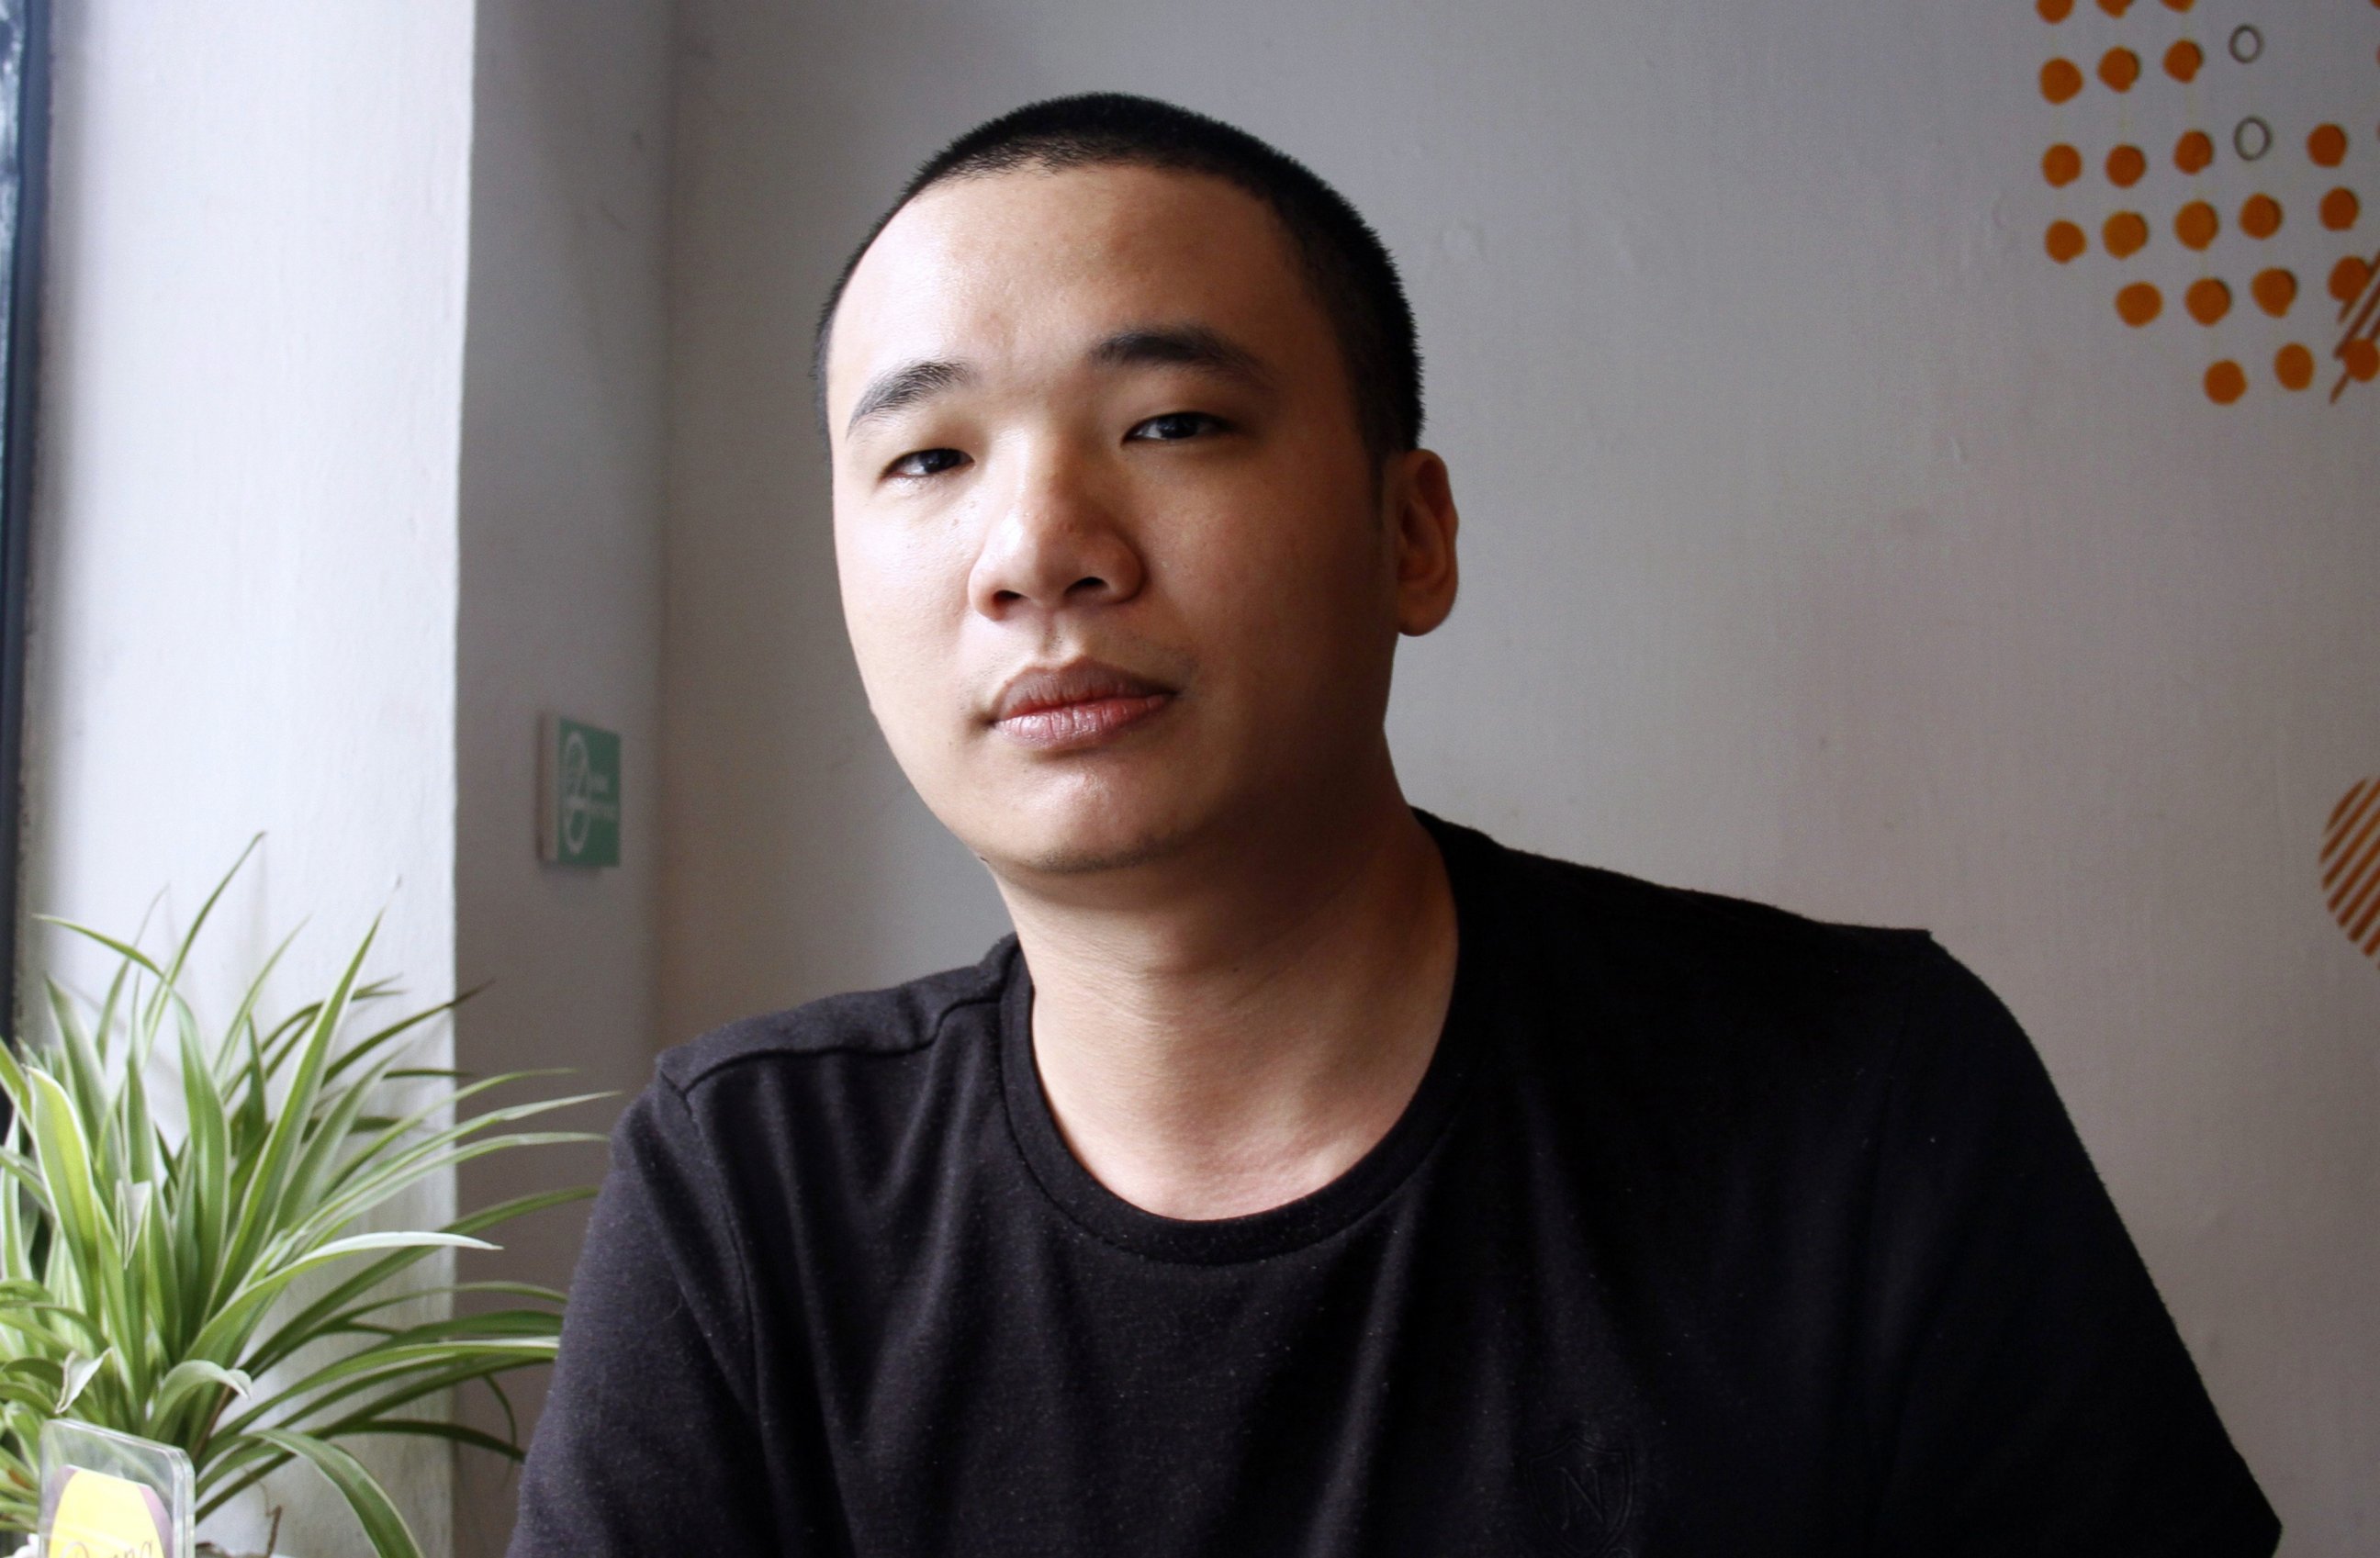 PHOTO: Nguyen Ha Dong, the author of the game Flappy Bird, relaxes inside a coffee shop in Hanoi, Vietnam, Feb. 5, 2014.